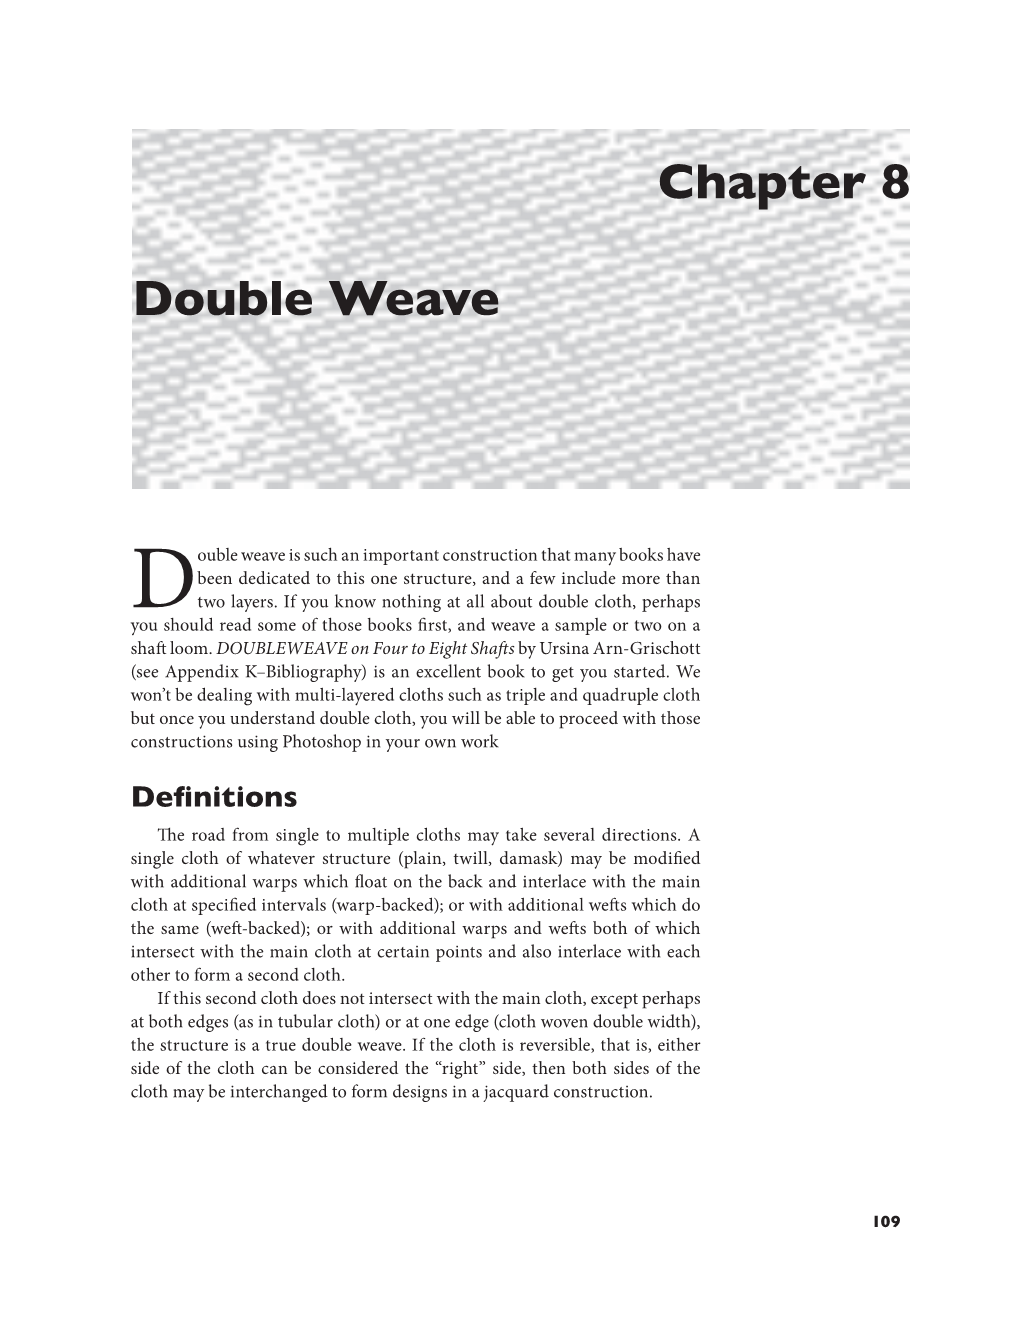 Chapter 8 Double Weave